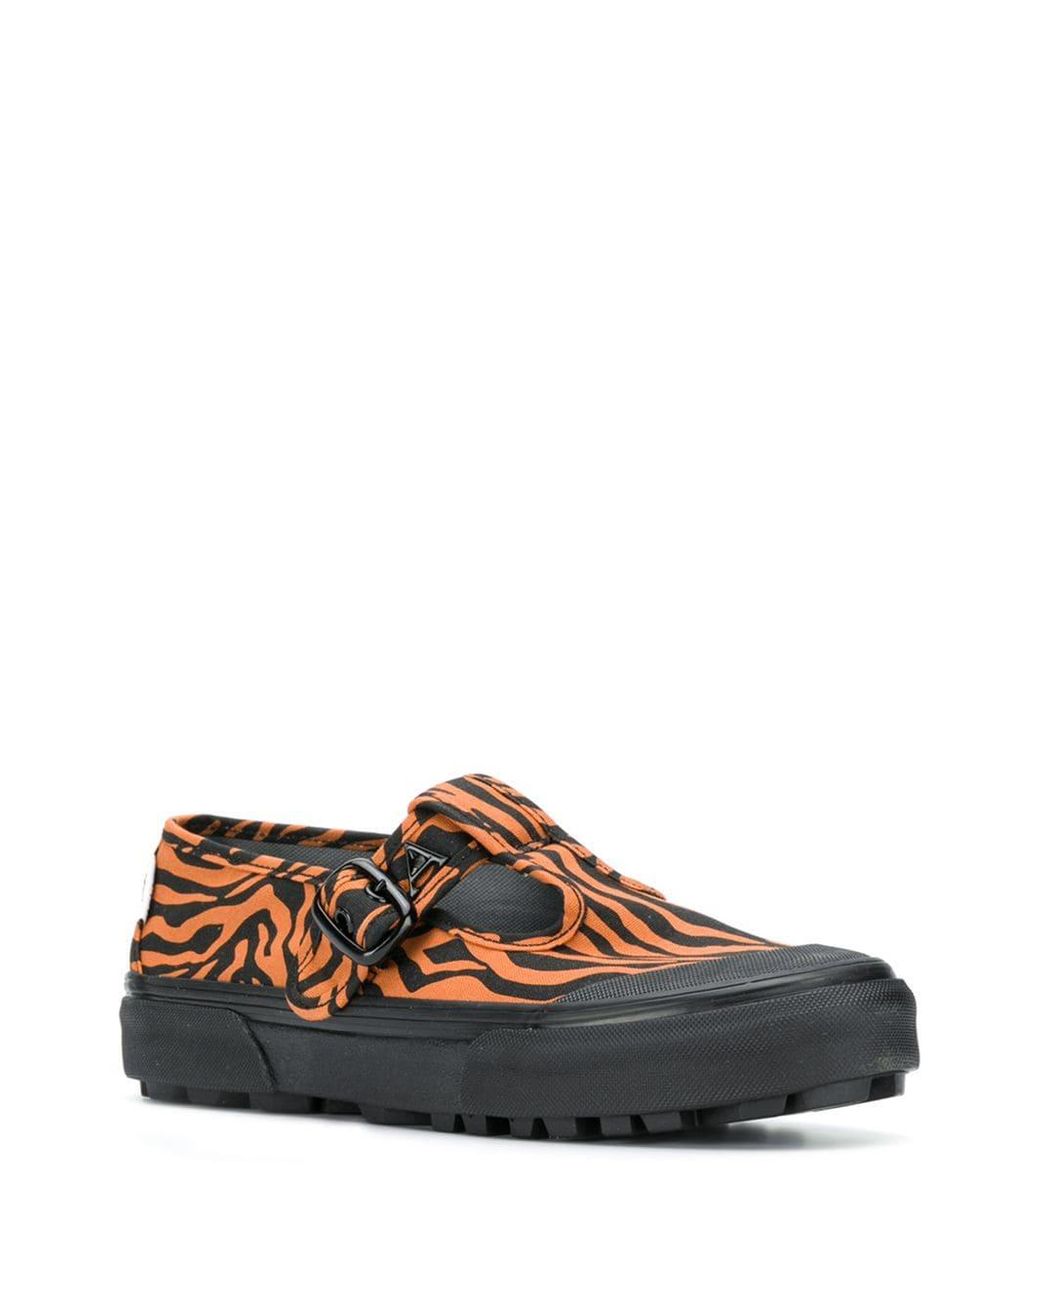 Vans X Ashley Williams Mary Jane Tiger Print Sneakers in Orange | Lyst  Canada